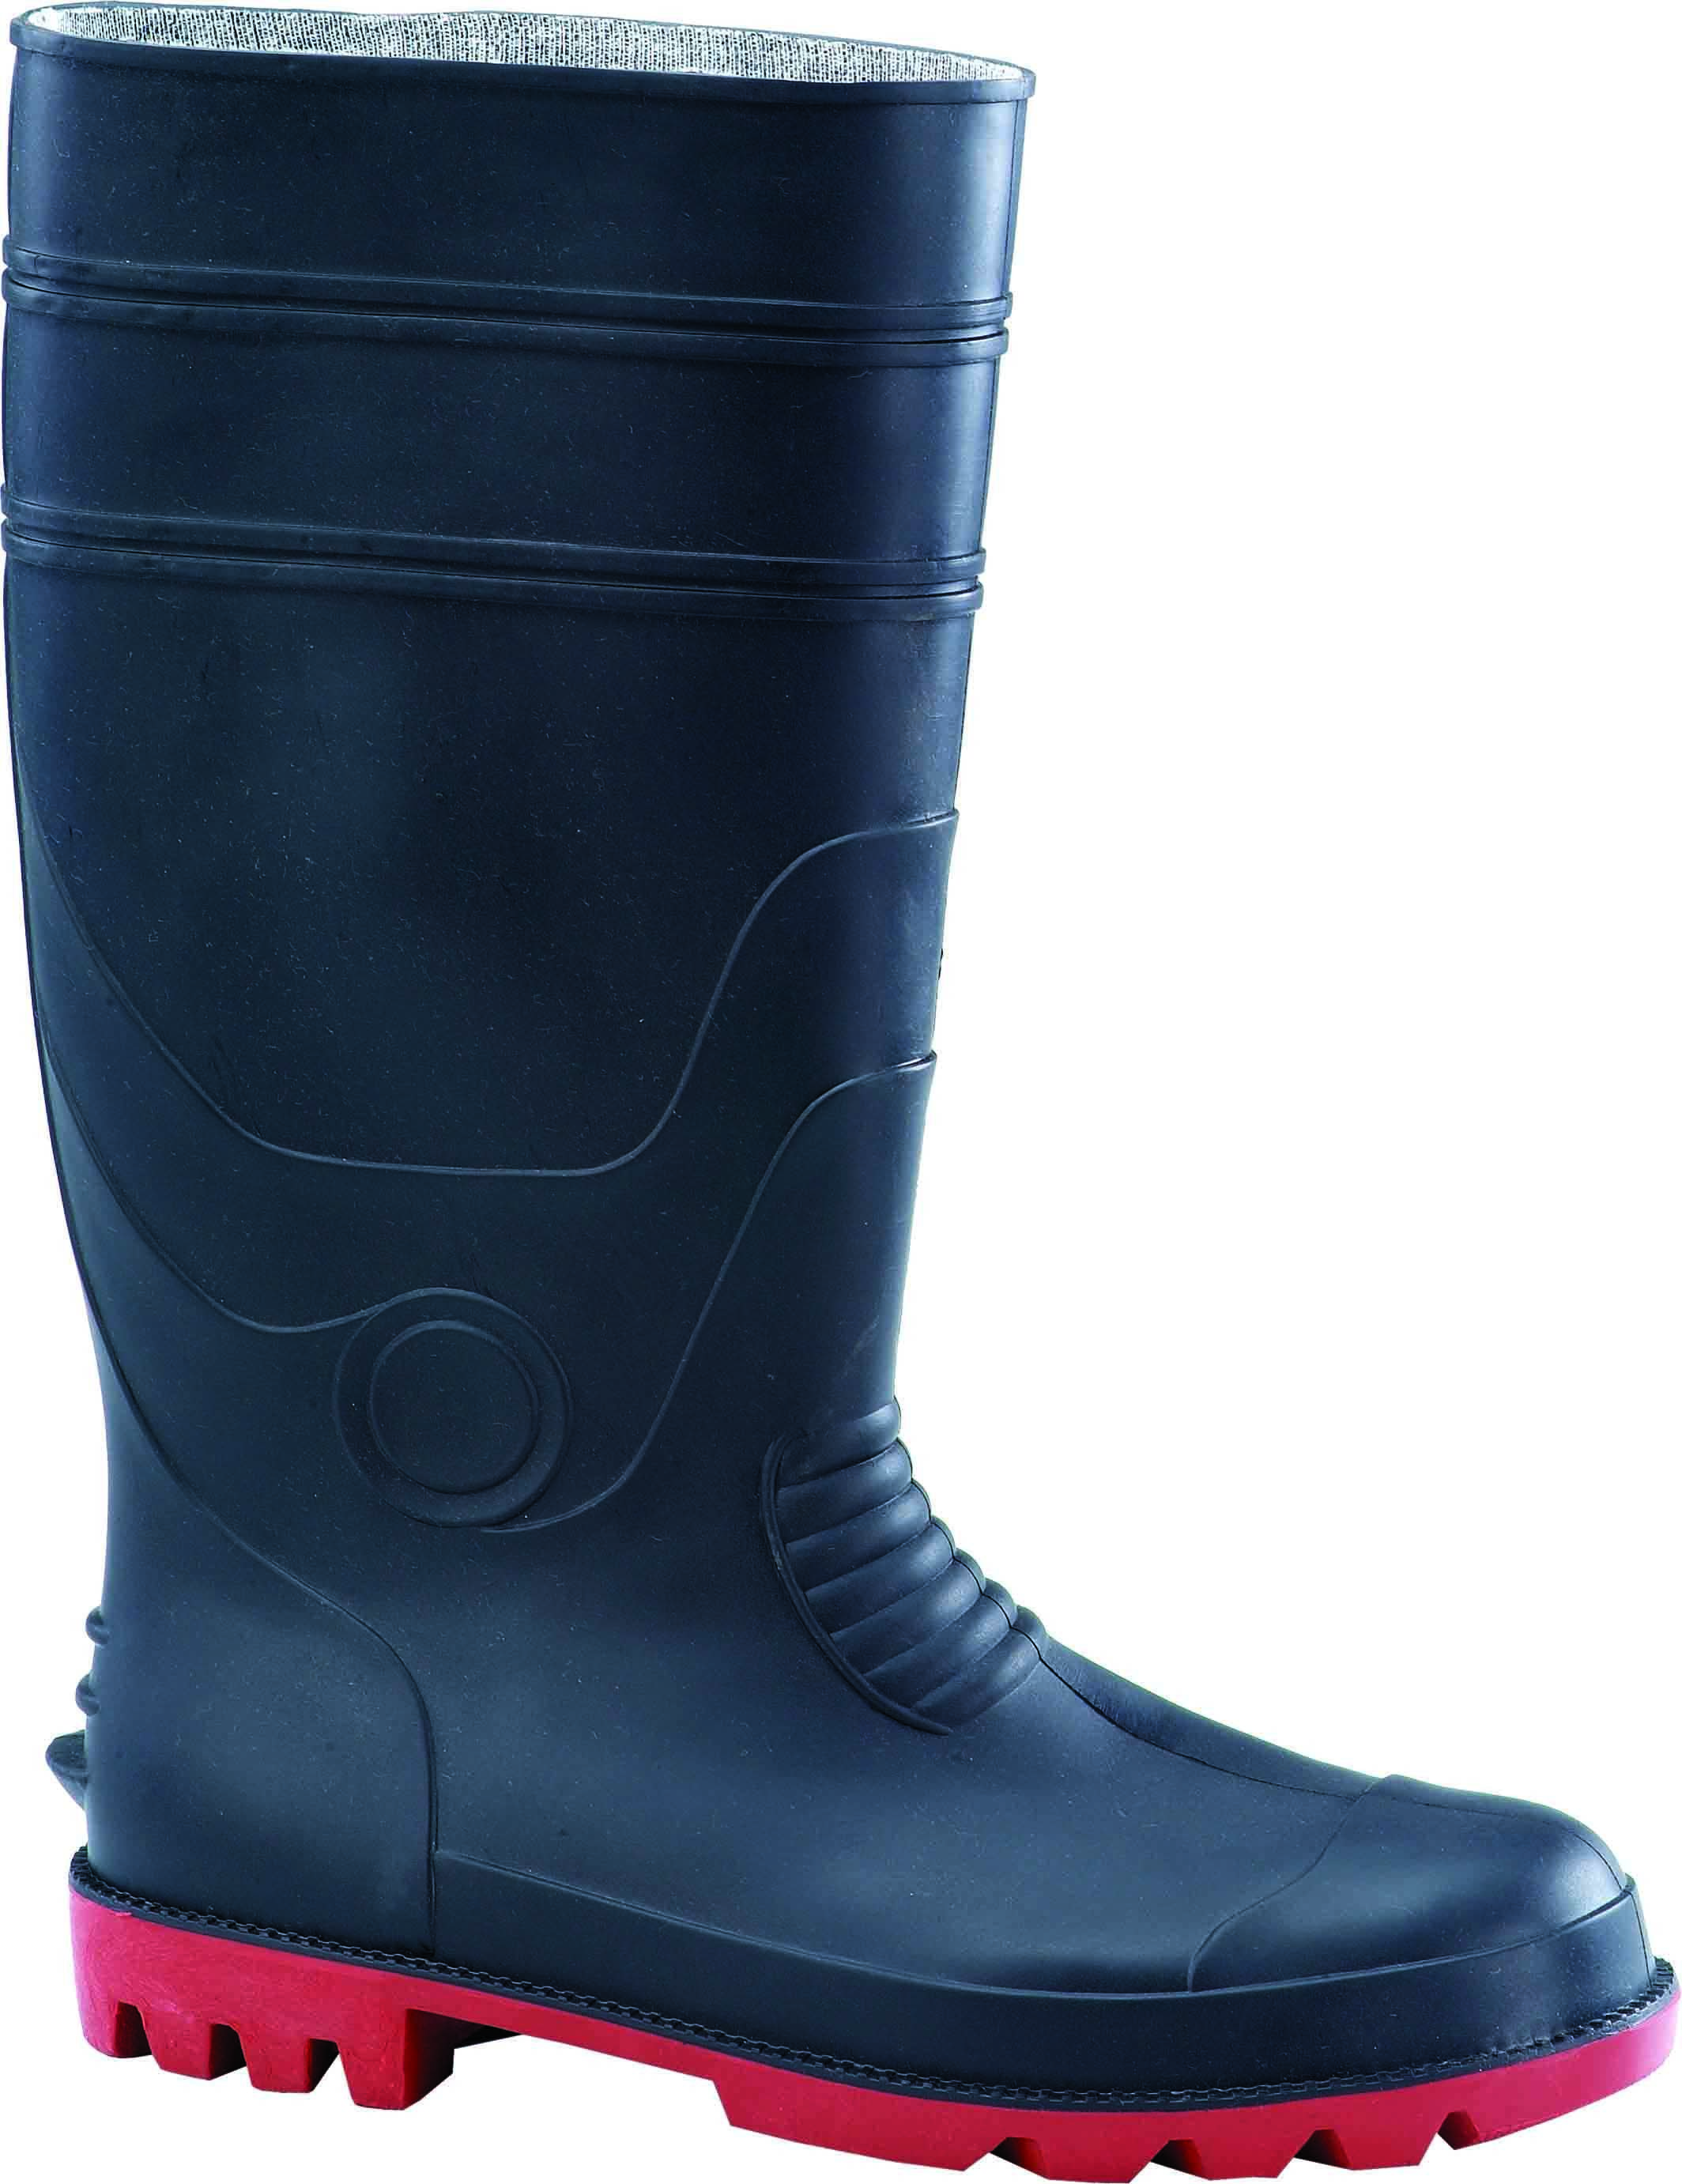 Red Sole Gumboots